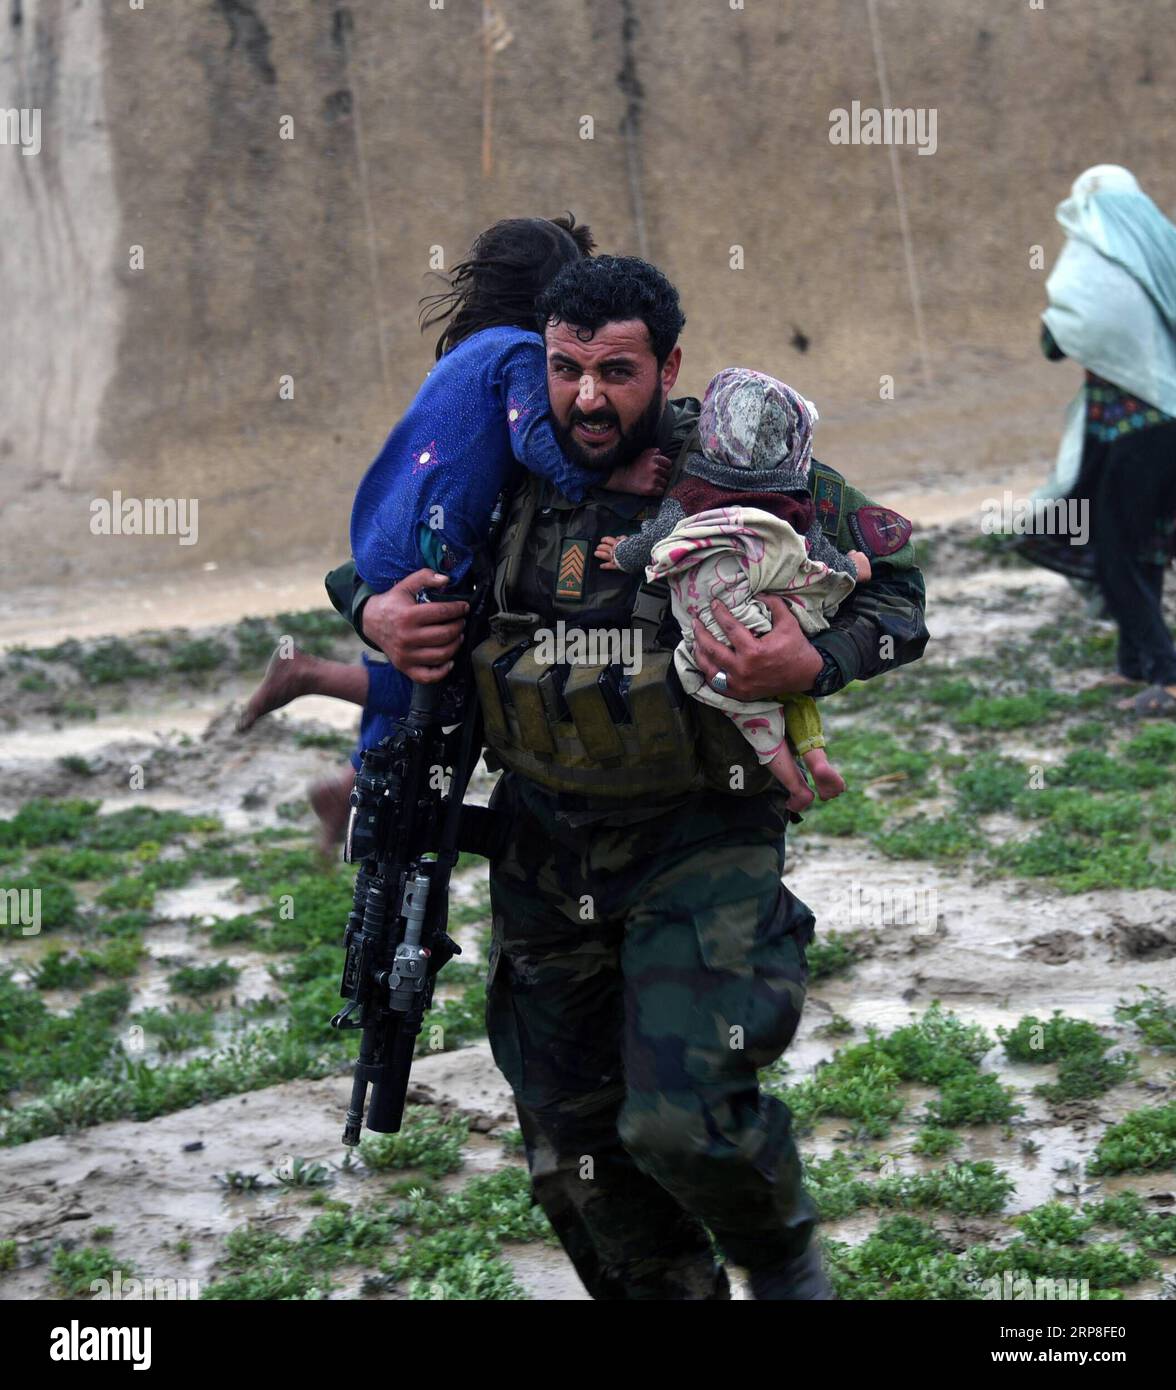 (190303) -- KANDAHAR, March 3, 2019 -- An Afghan security force member rescues children during an evacuation operation after a flood in Kandahar province, Afghanistan, March 2, 2019 . At least 20 people were killed and many others went missing after flash floods hit Afghanistan s southern province of Kandahar, authorities said Sunday. STR) AFGHANISTAN-KANDAHAR-EVACUATION OPERATION-FLOOD XinhuaxKabul PUBLICATIONxNOTxINxCHN Stock Photo